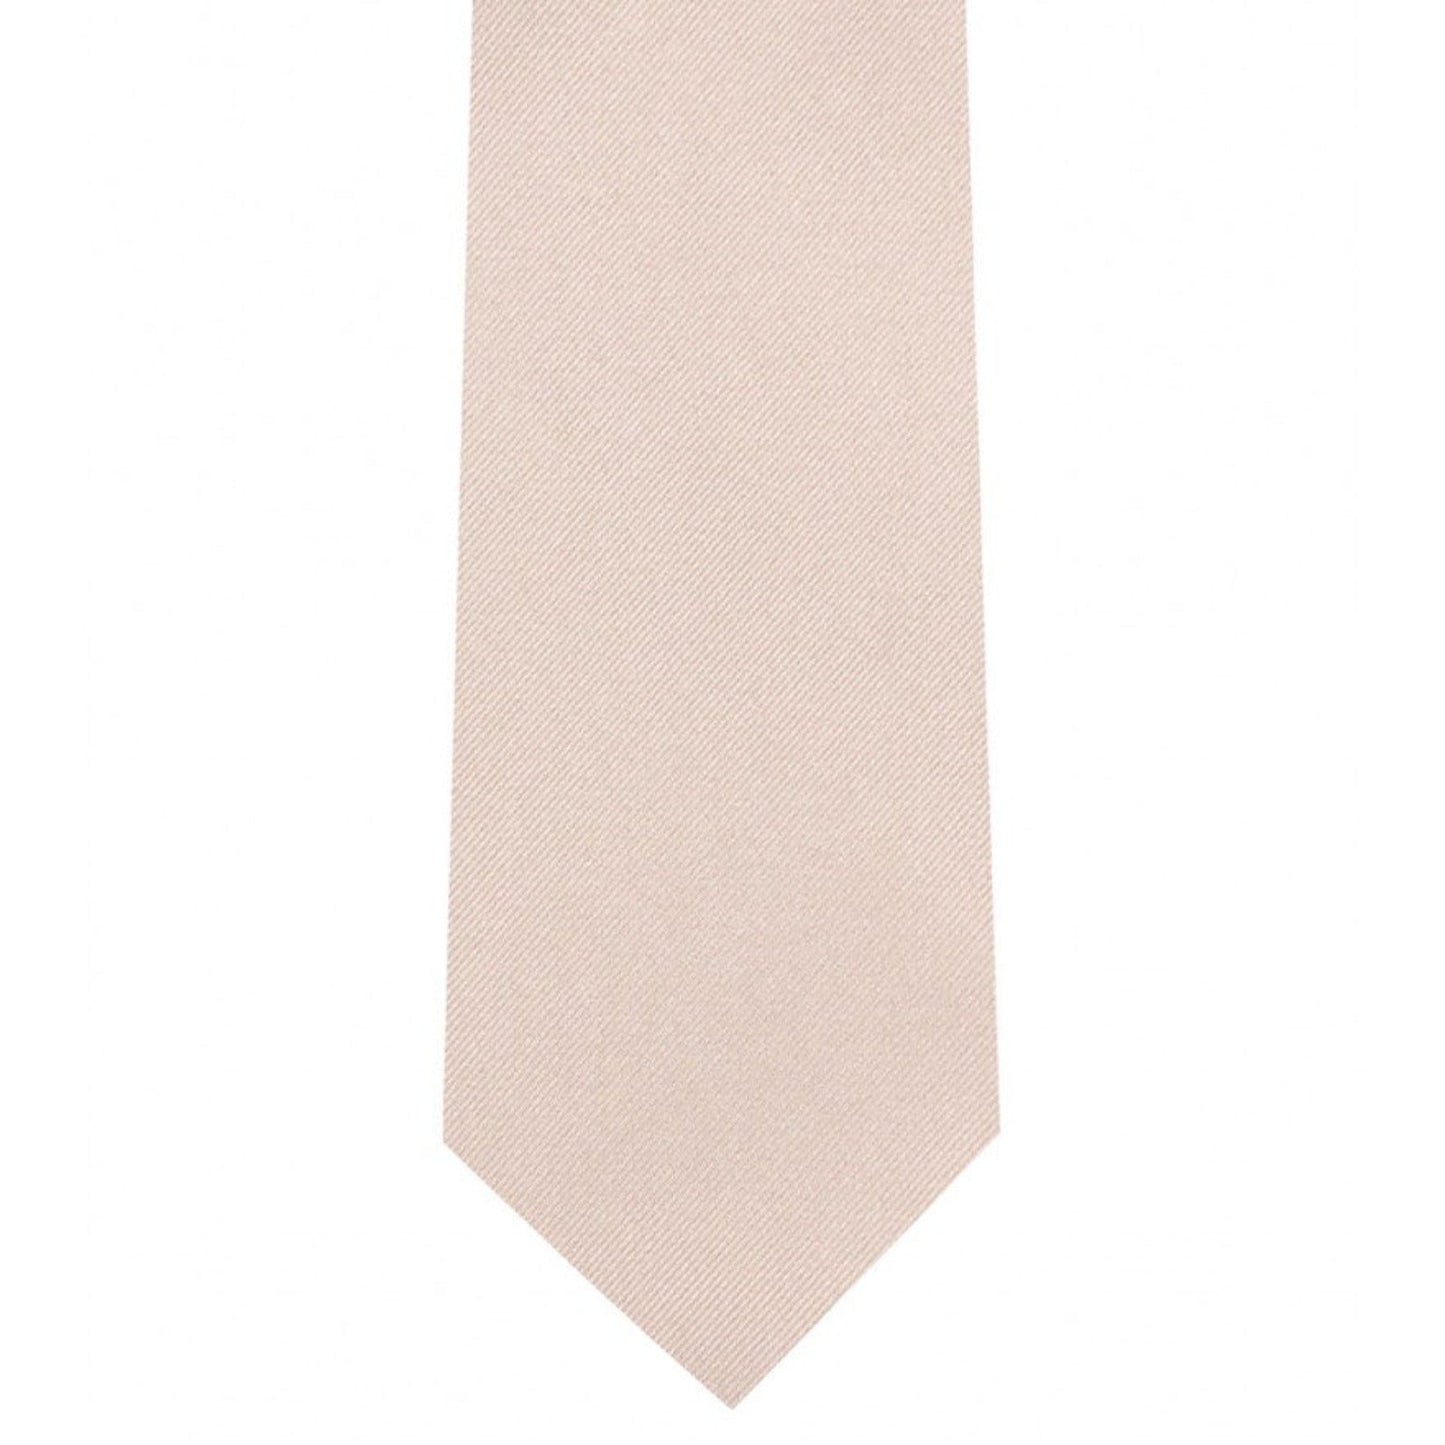 Classic Light Blush Tie Ultra Skinny tie width 2.25 inches With Matching Pocket Square | KCT Menswear